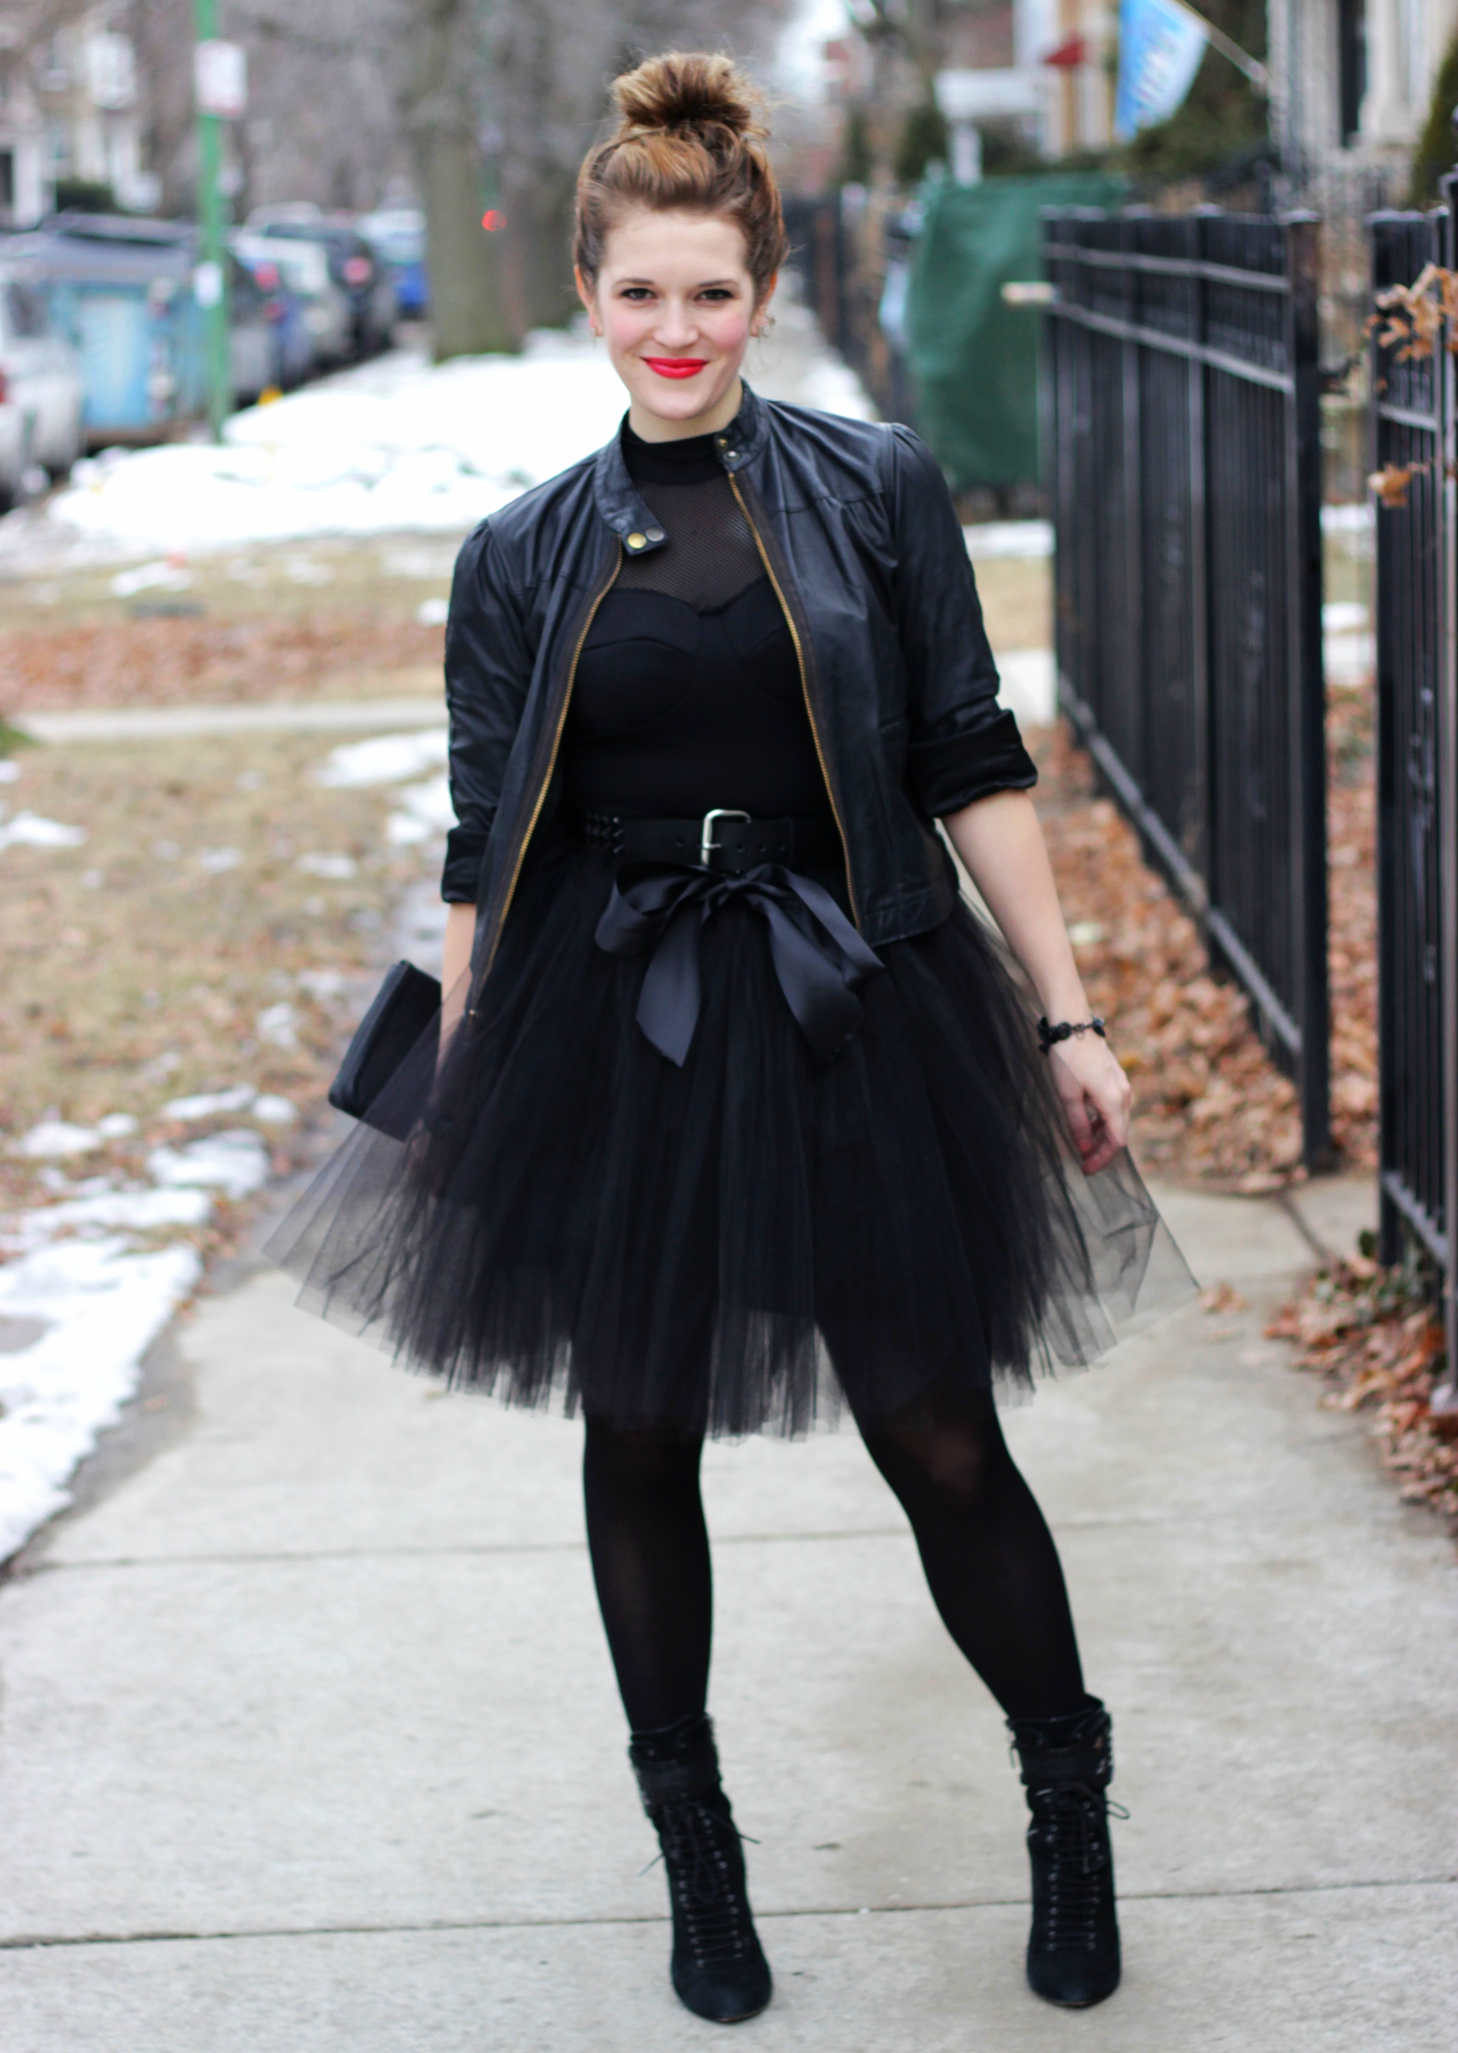 how to wear a tutu on belle meets world blog